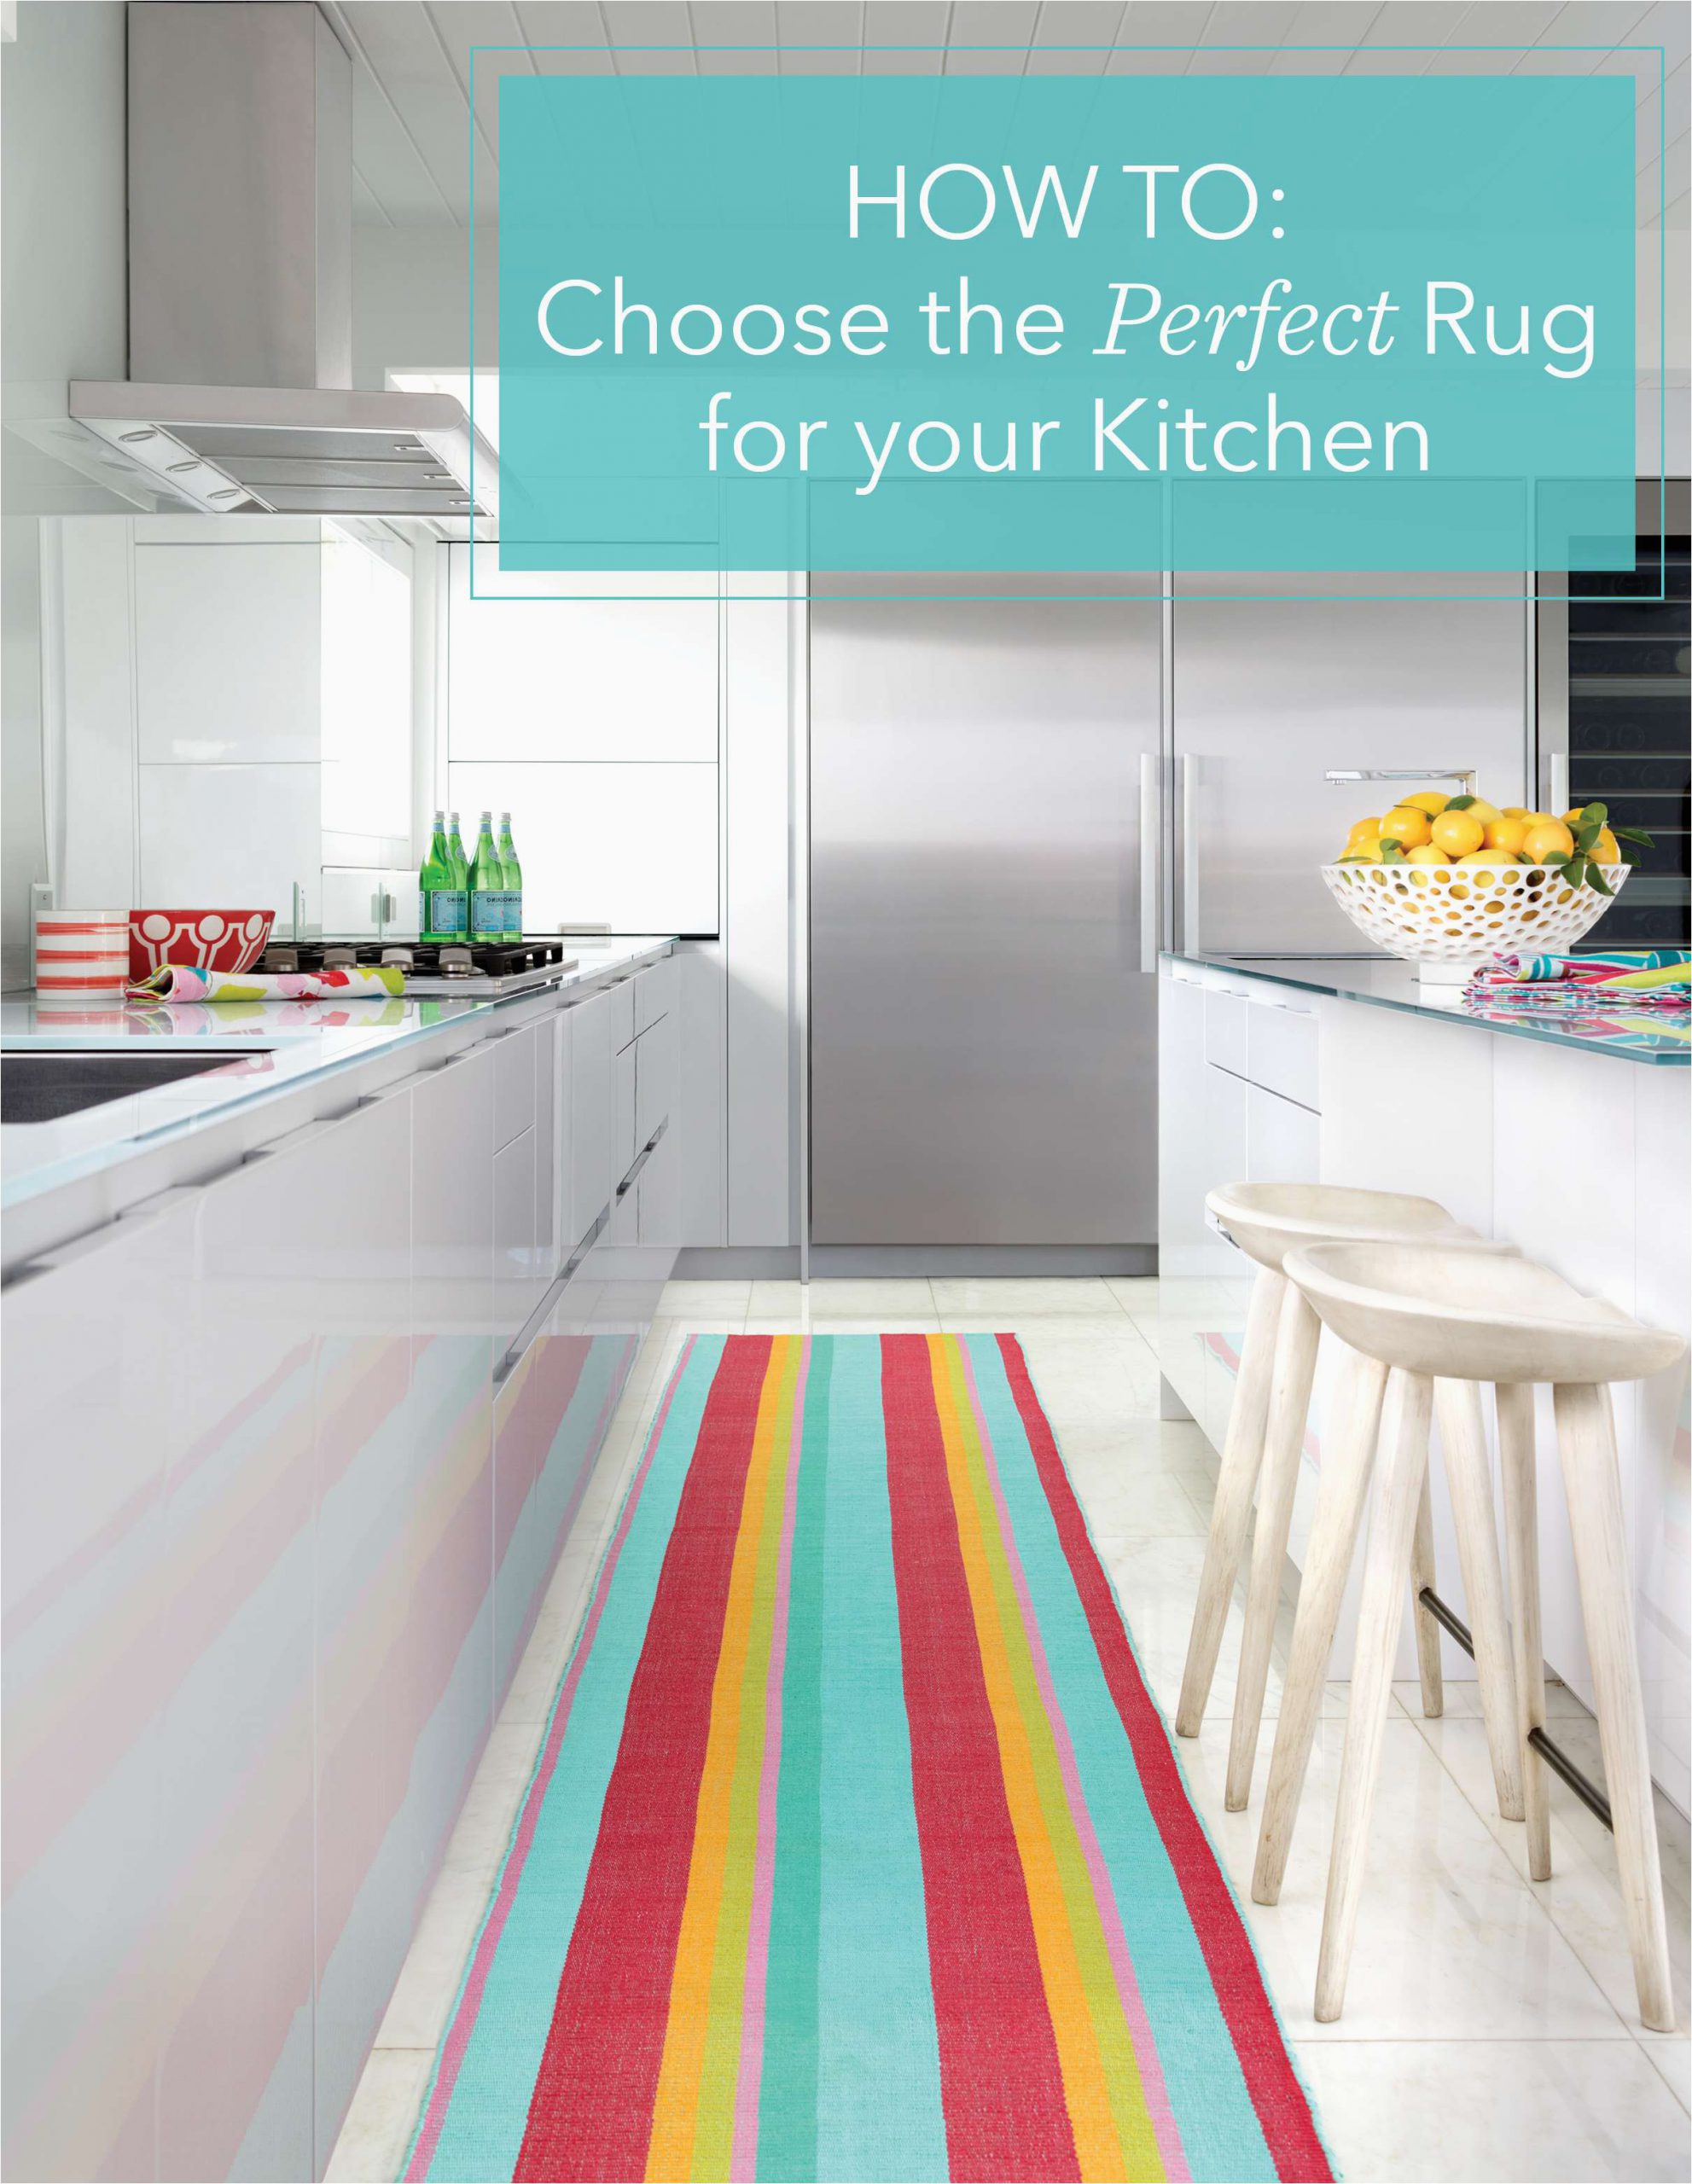 Best Rug for Kitchen Sink area How to Choose the Perfect Kitchen Rug